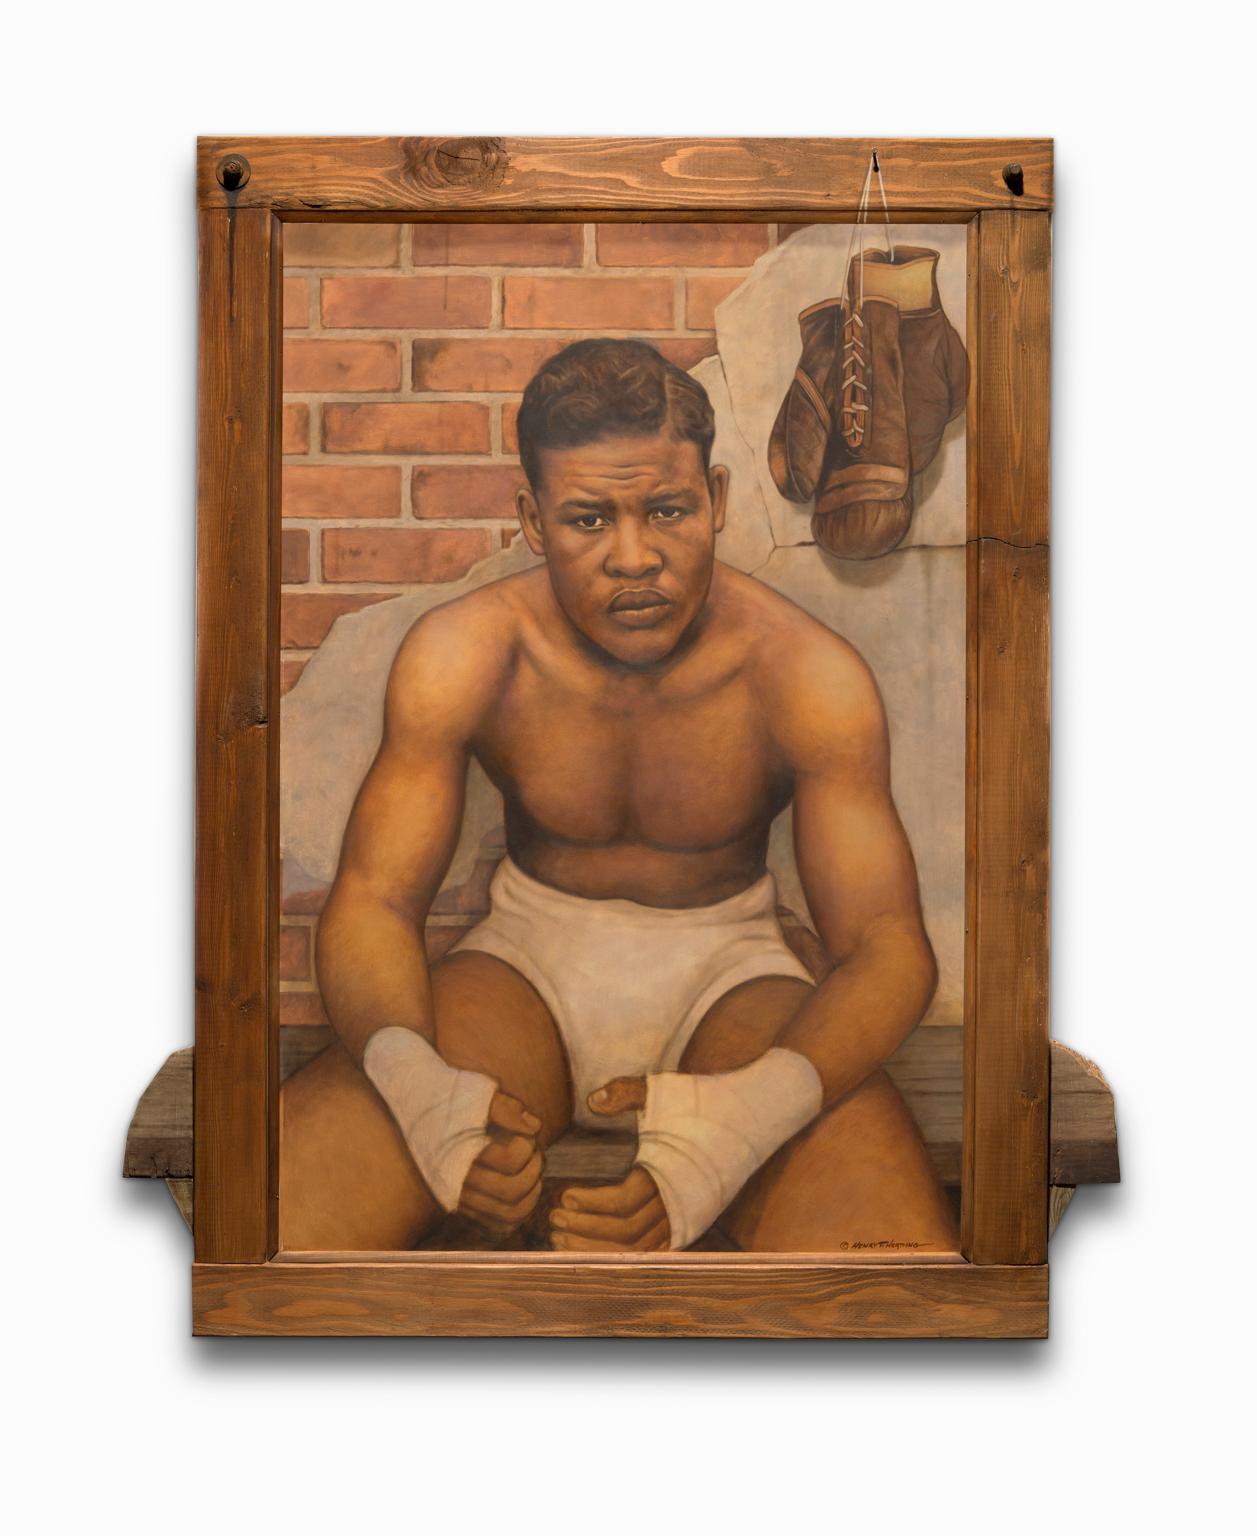 Henry Heading Portrait Painting - "Joe Louis" Oil on Board with Mixed Media, Iconic Portrait, African American